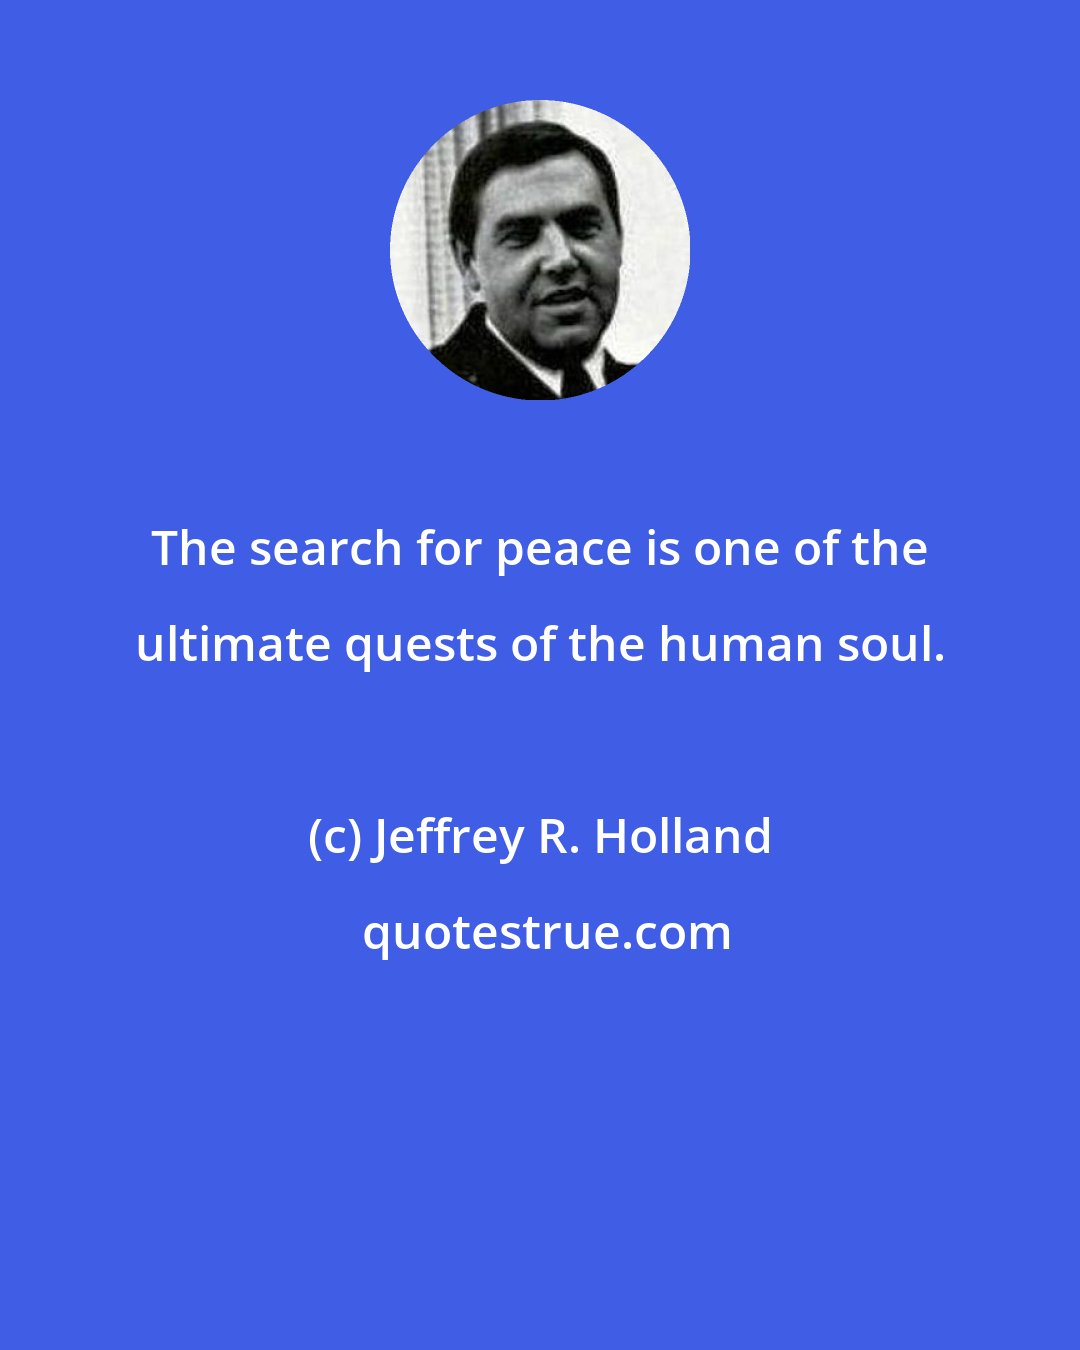 Jeffrey R. Holland: The search for peace is one of the ultimate quests of the human soul.